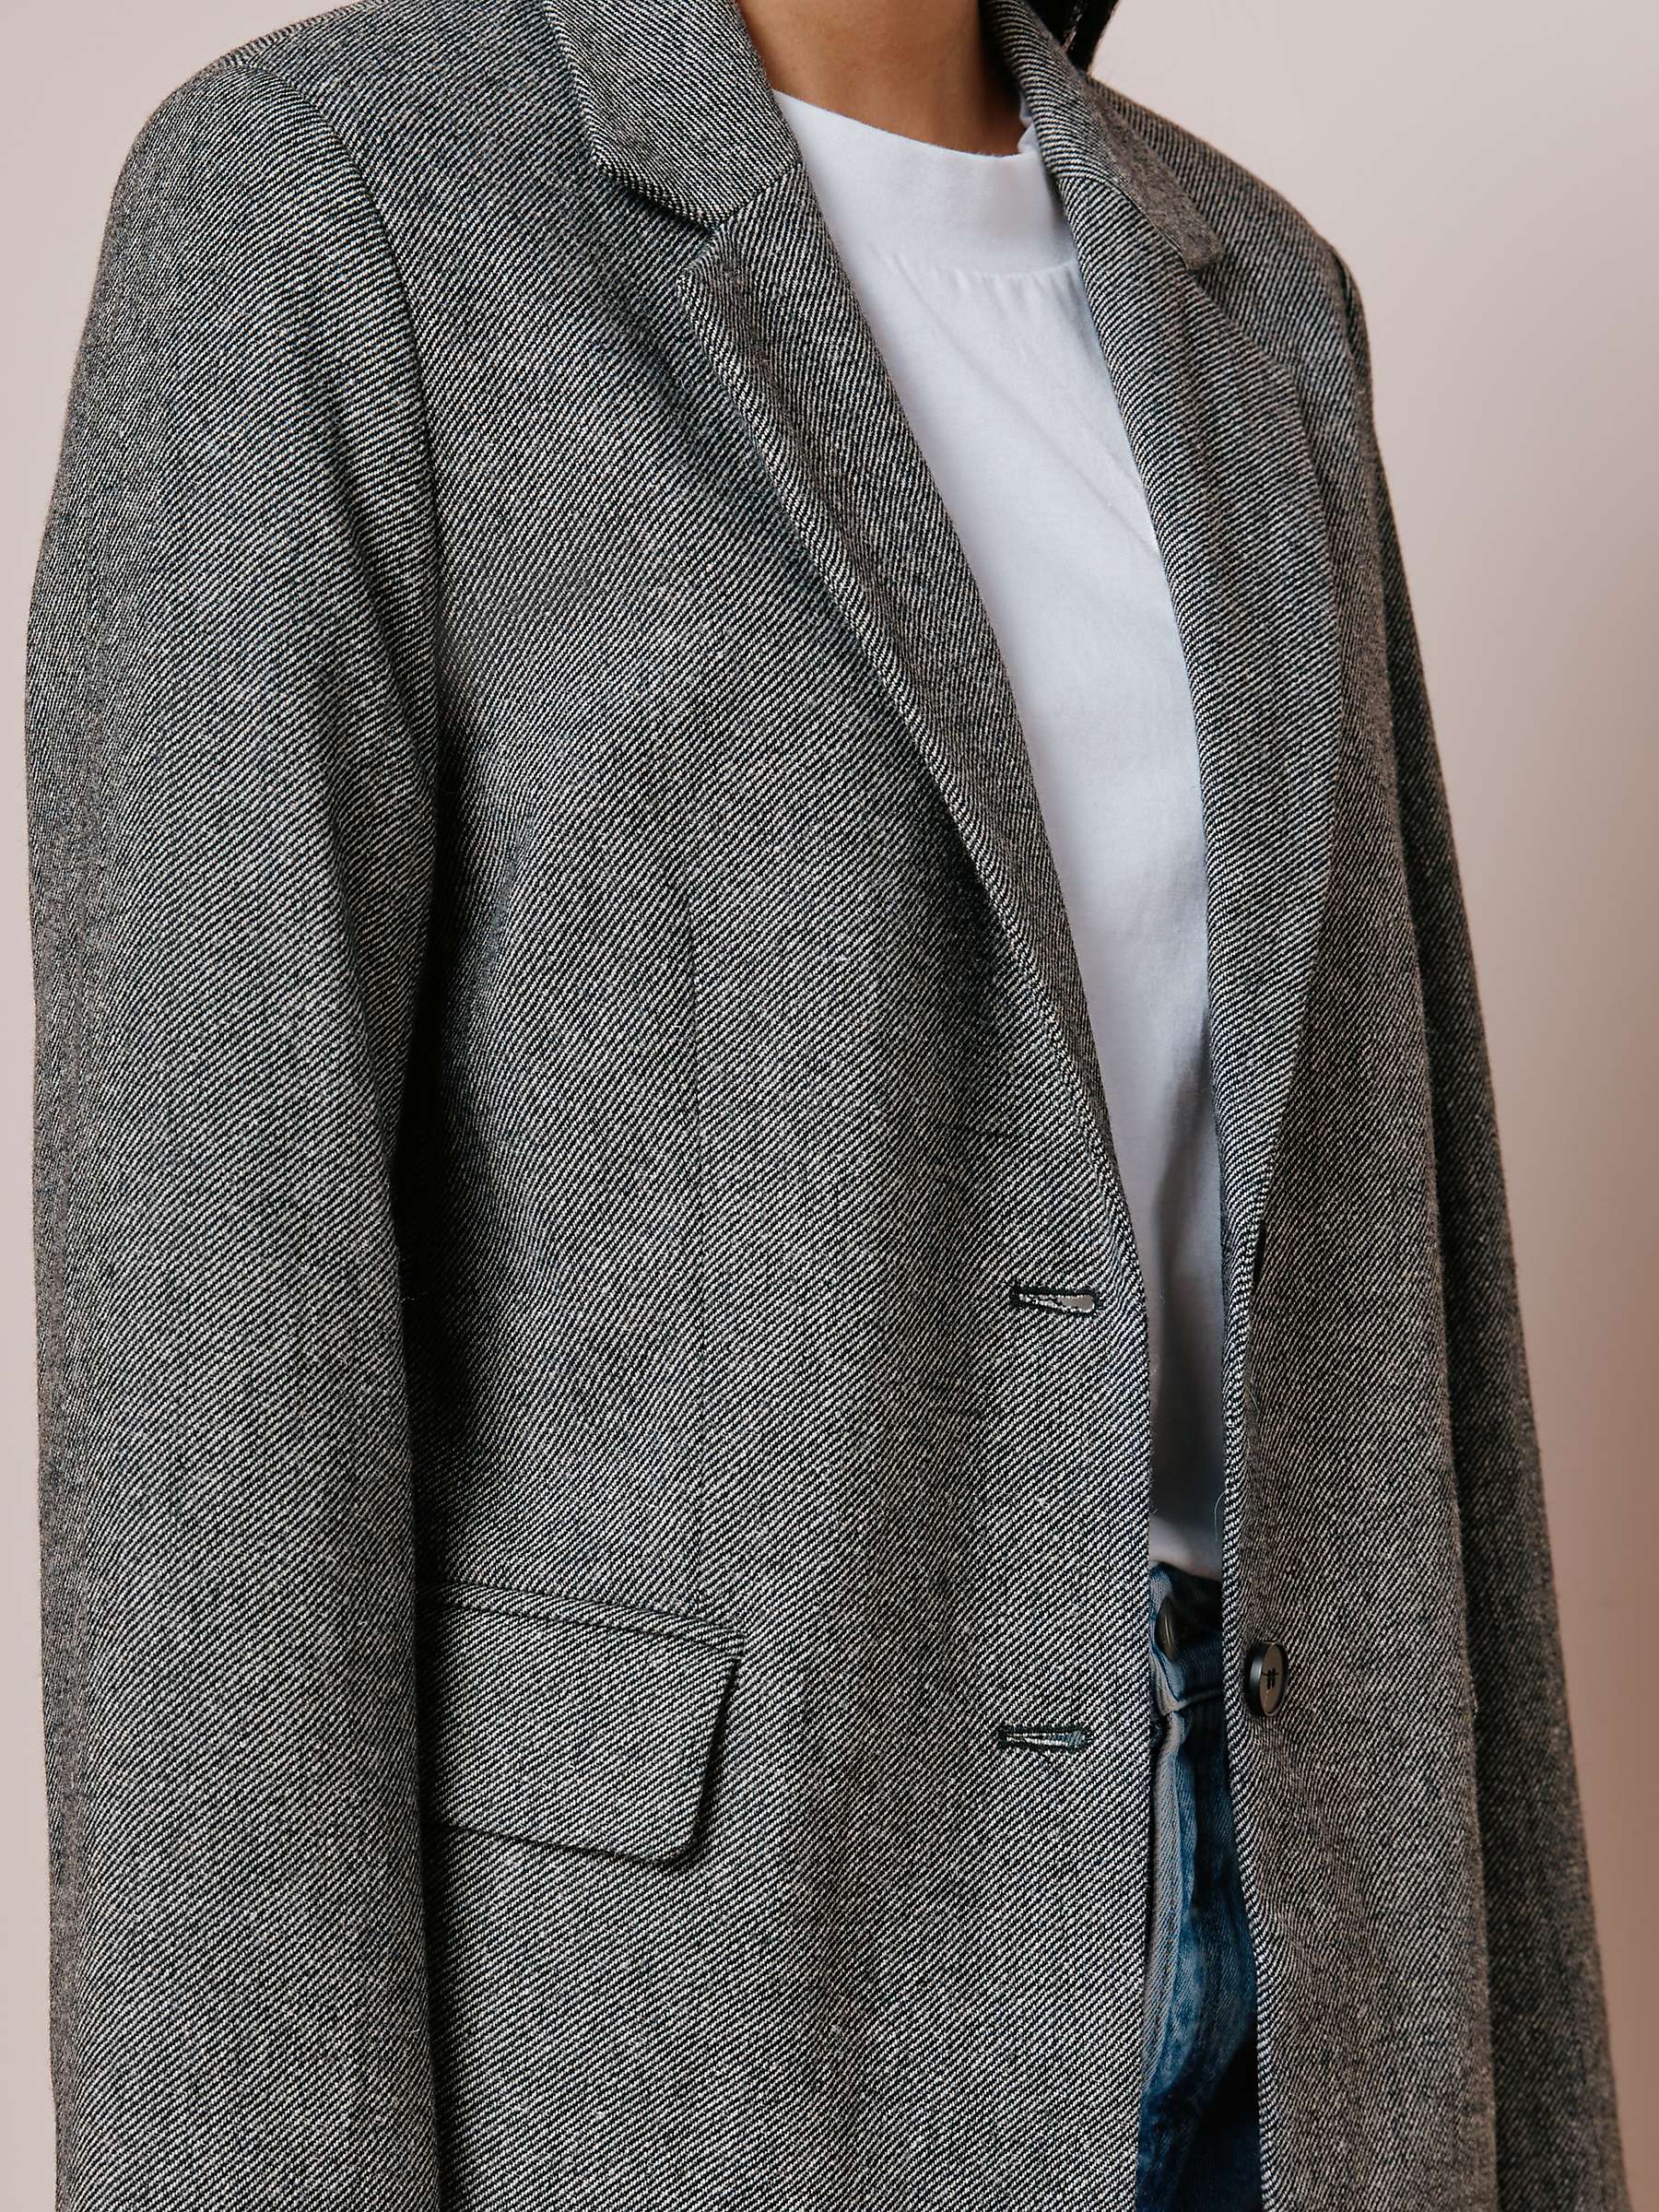 Buy Albaray Textured Wool Blend Relaxed Tailored Blazer, Grey Online at johnlewis.com